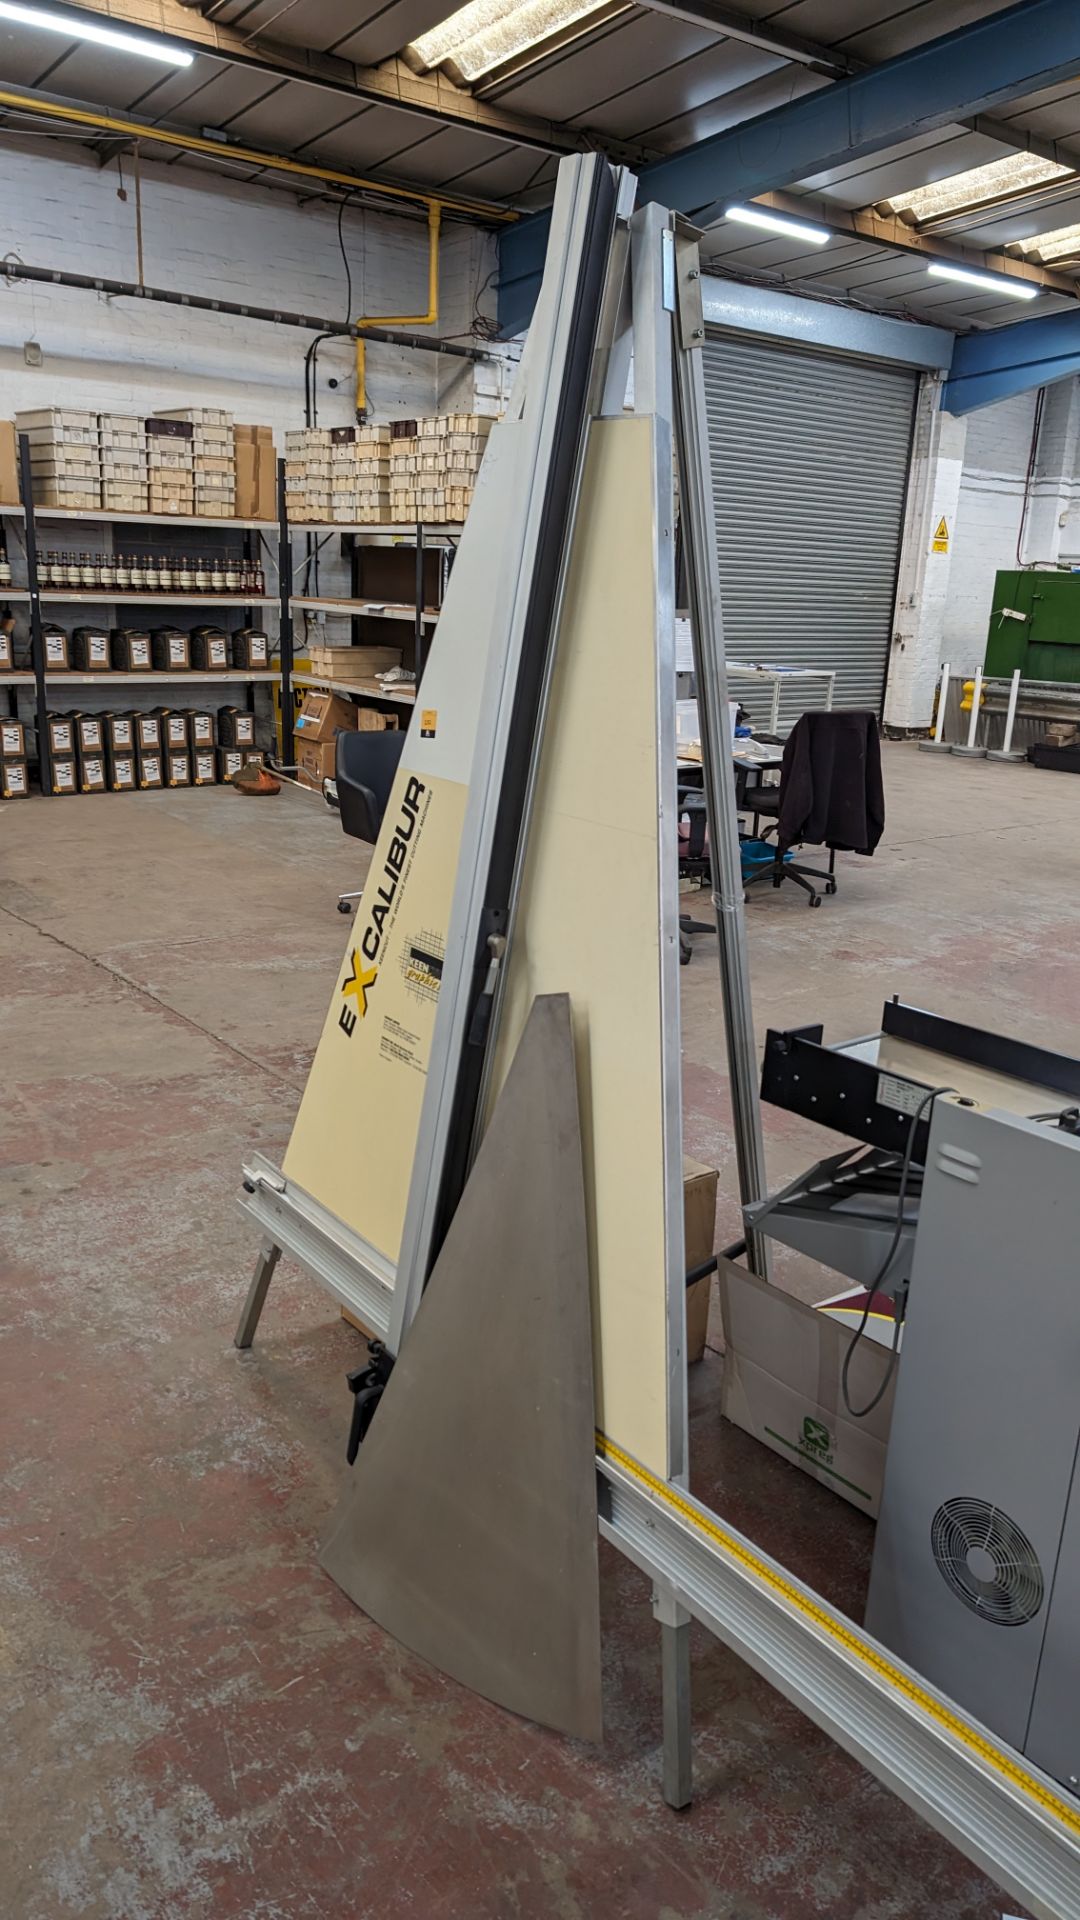 Keencut Graphics Excalibur A frame cutter. Height approximately 2330mm, max width including measuri - Image 9 of 13